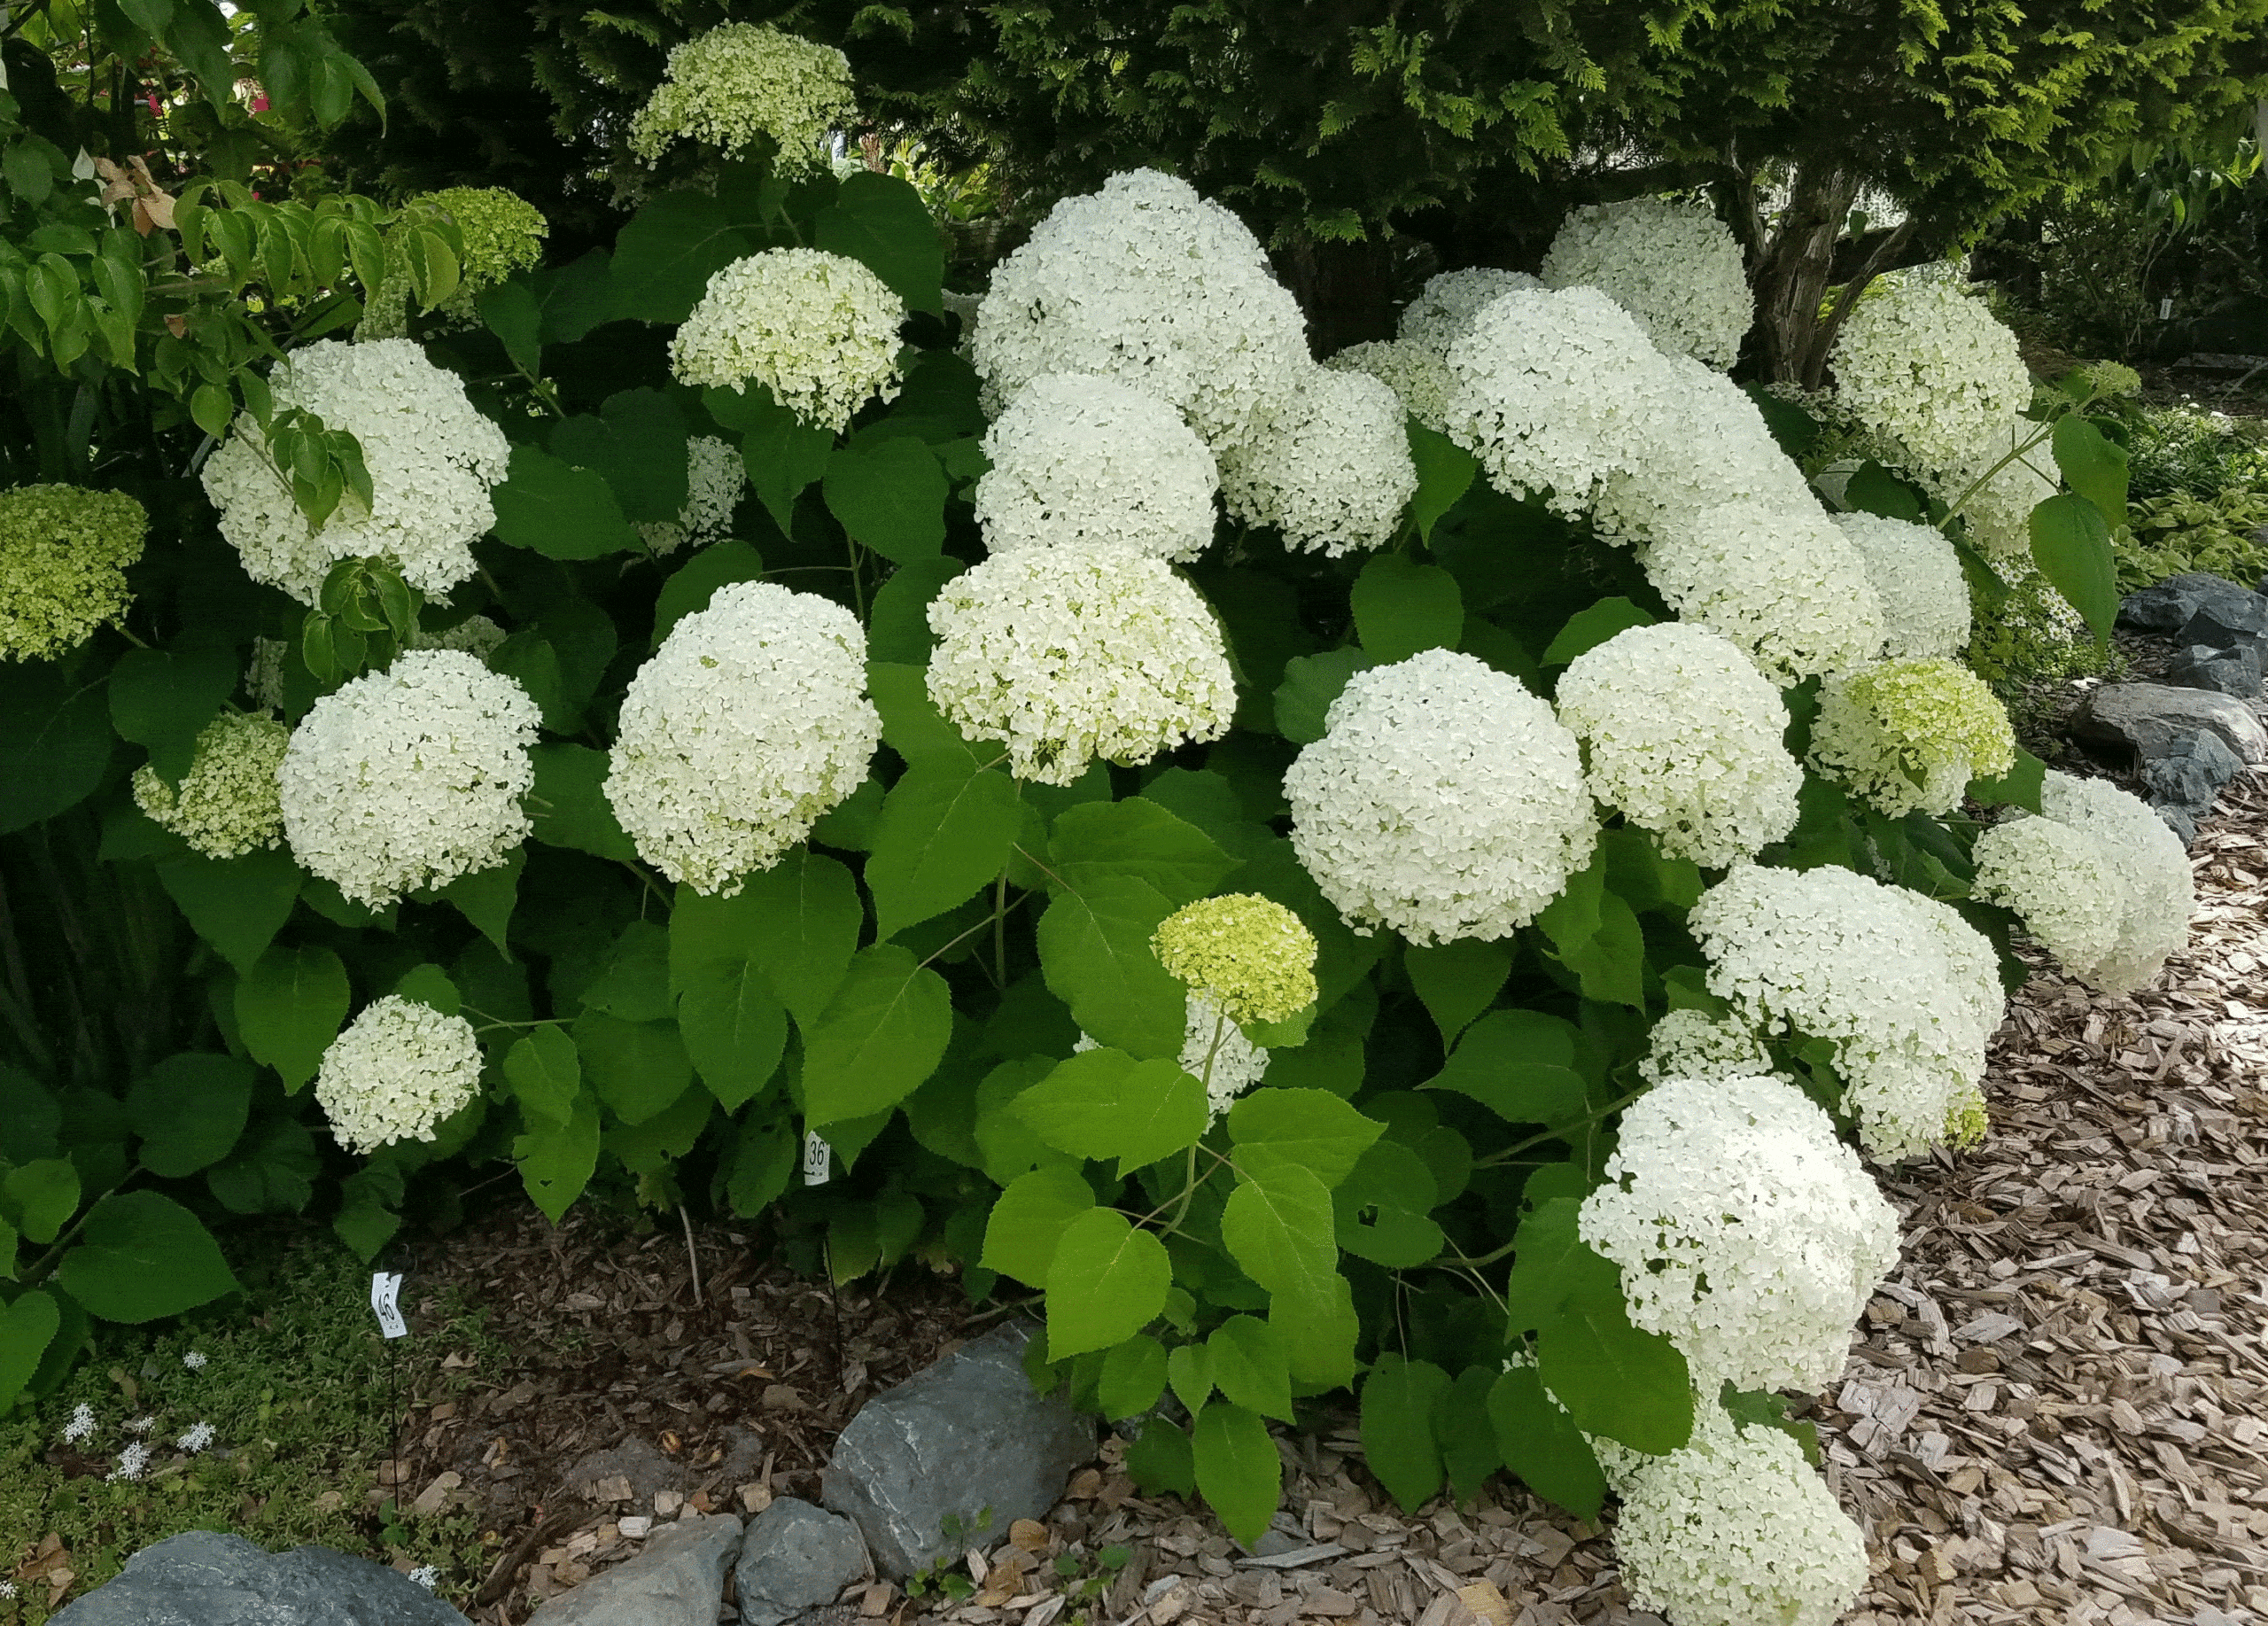 Hydrangea arborescens 'Annabelle' with its dinner plate size blooms draws lots of attention during the summer. 